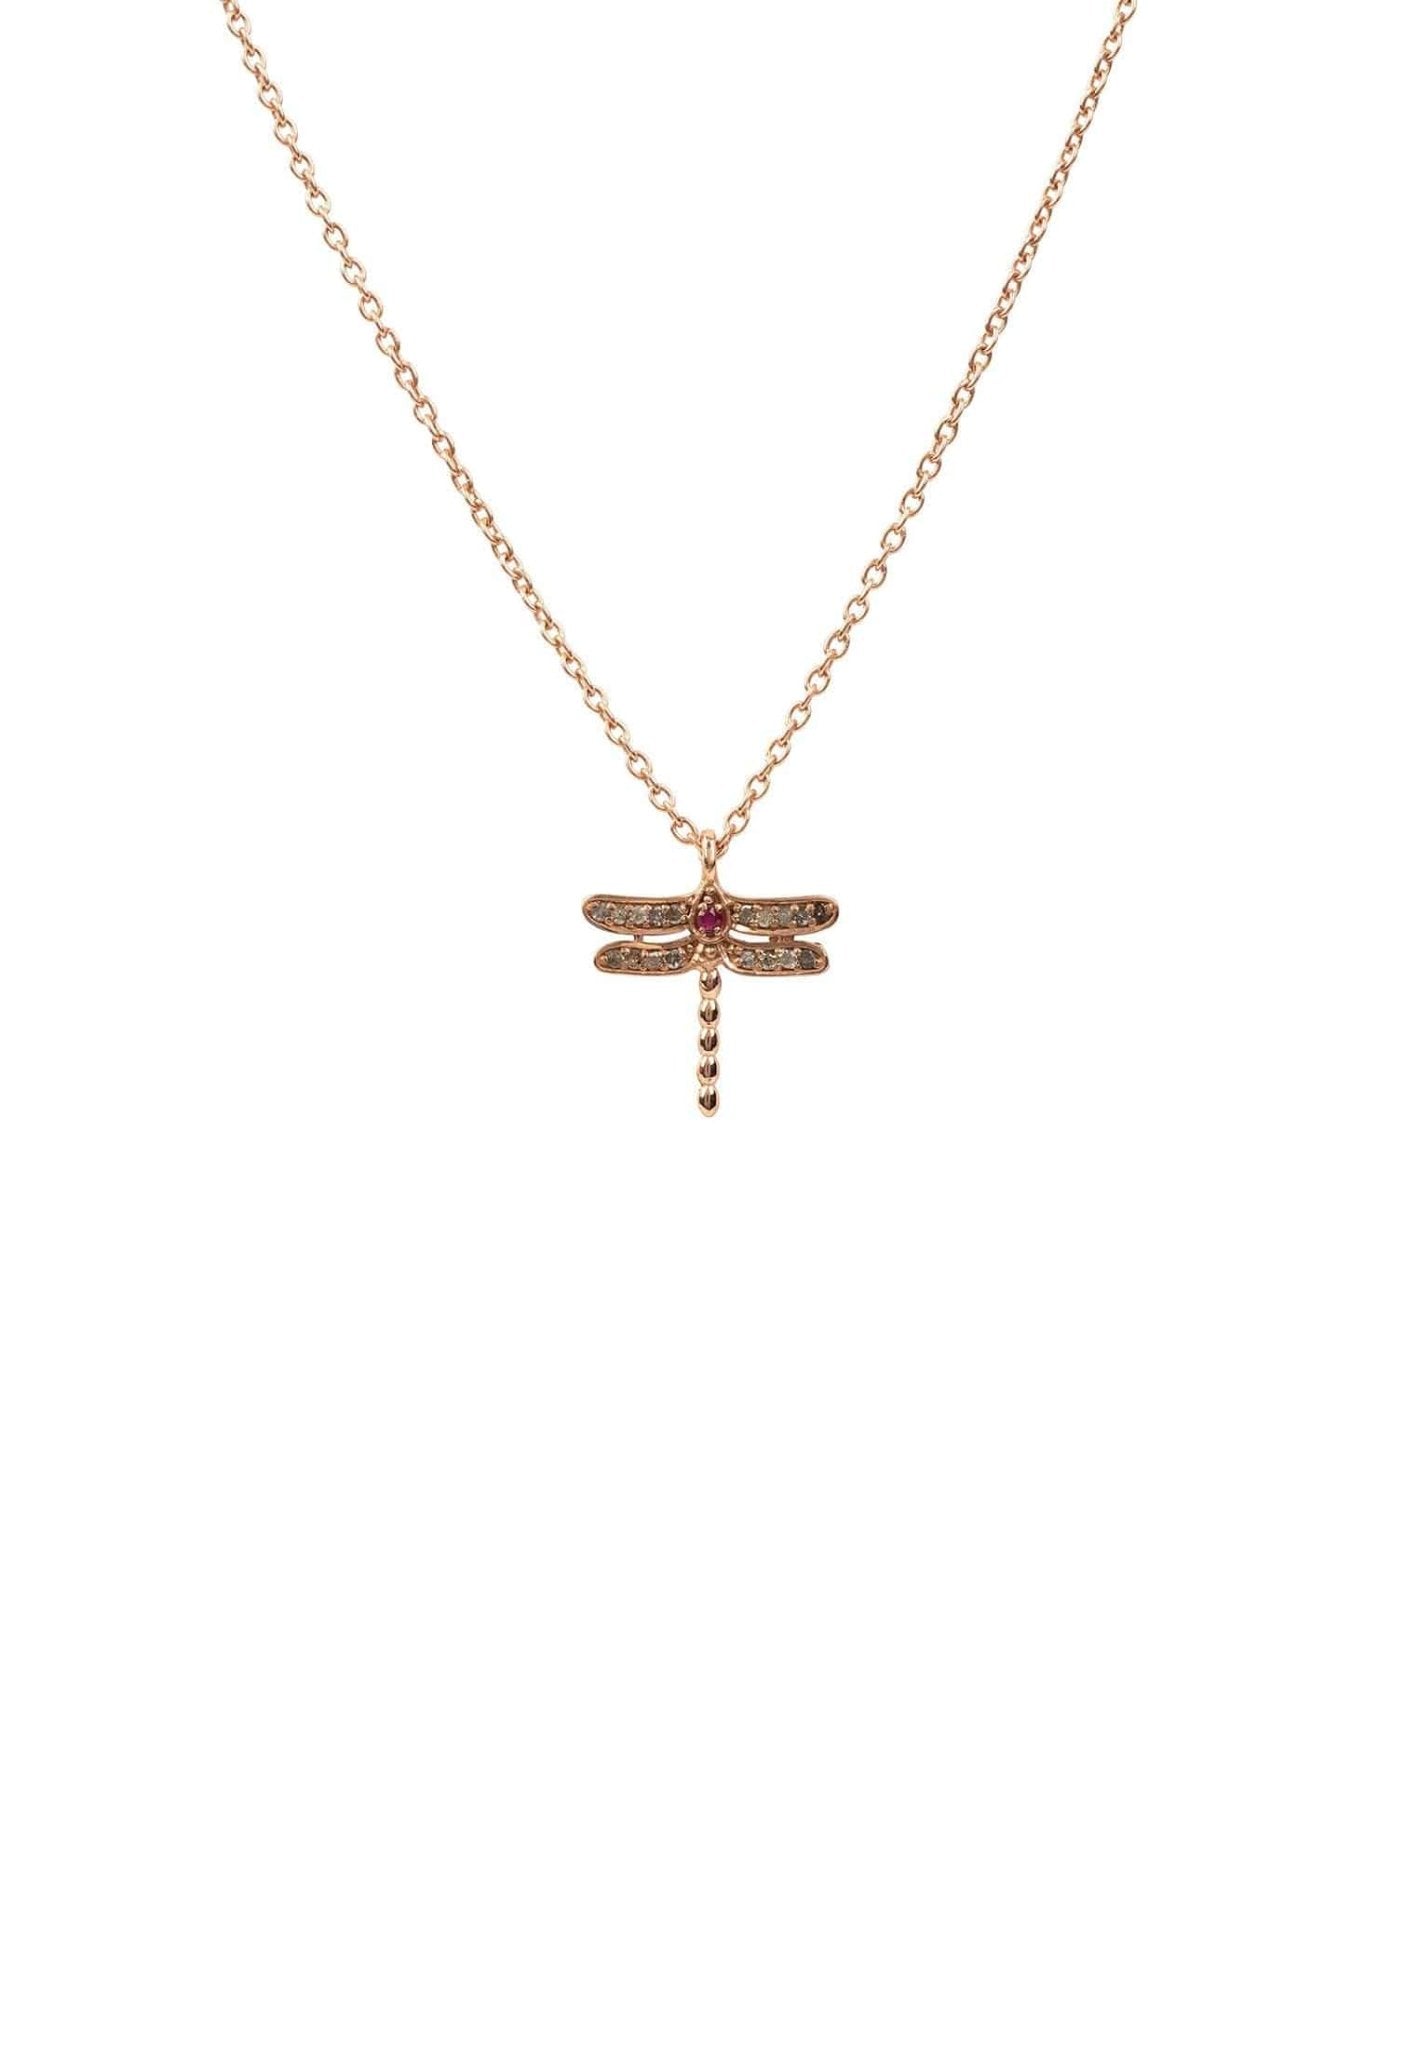 Diamond & Ruby Dragonfly Necklace Rosegold - LATELITA Necklaces